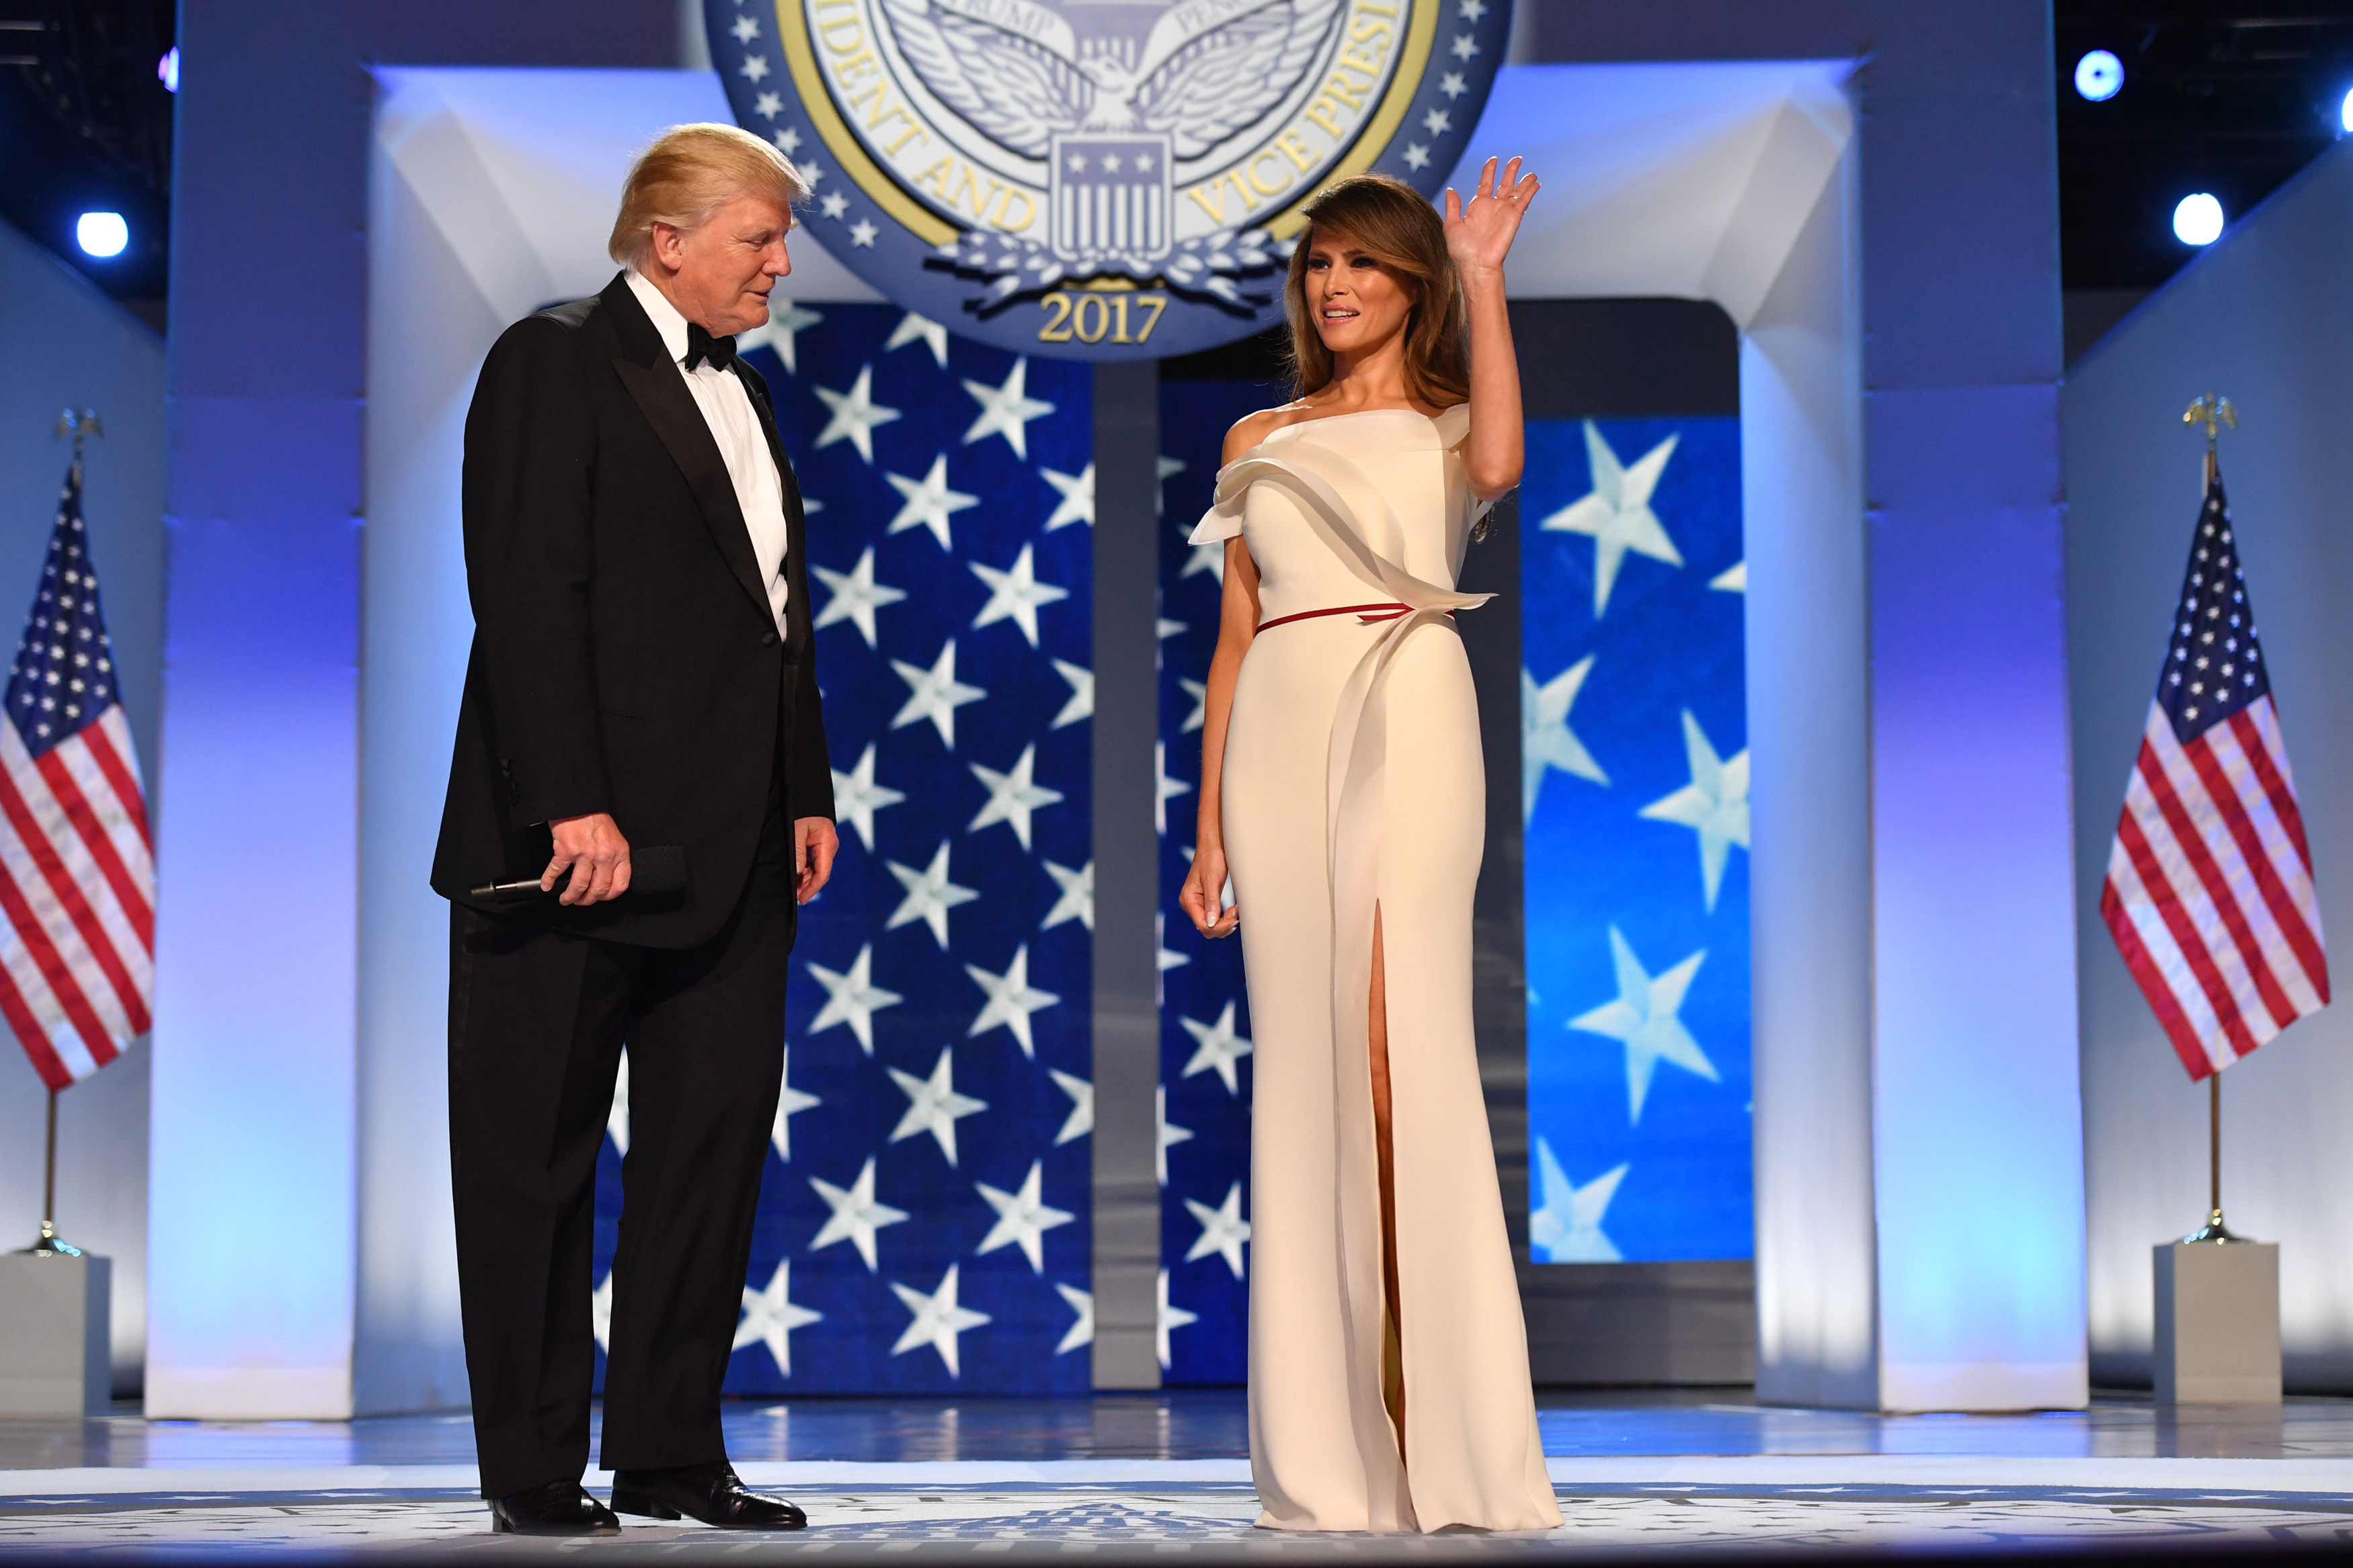 President Donald Trump and First Lady Melania Trump arrive at the Freedom Ball on January 20, 2017 in Washington, D.C. Pool&mdash;Getty Images (Pool&mdash;Getty Images)